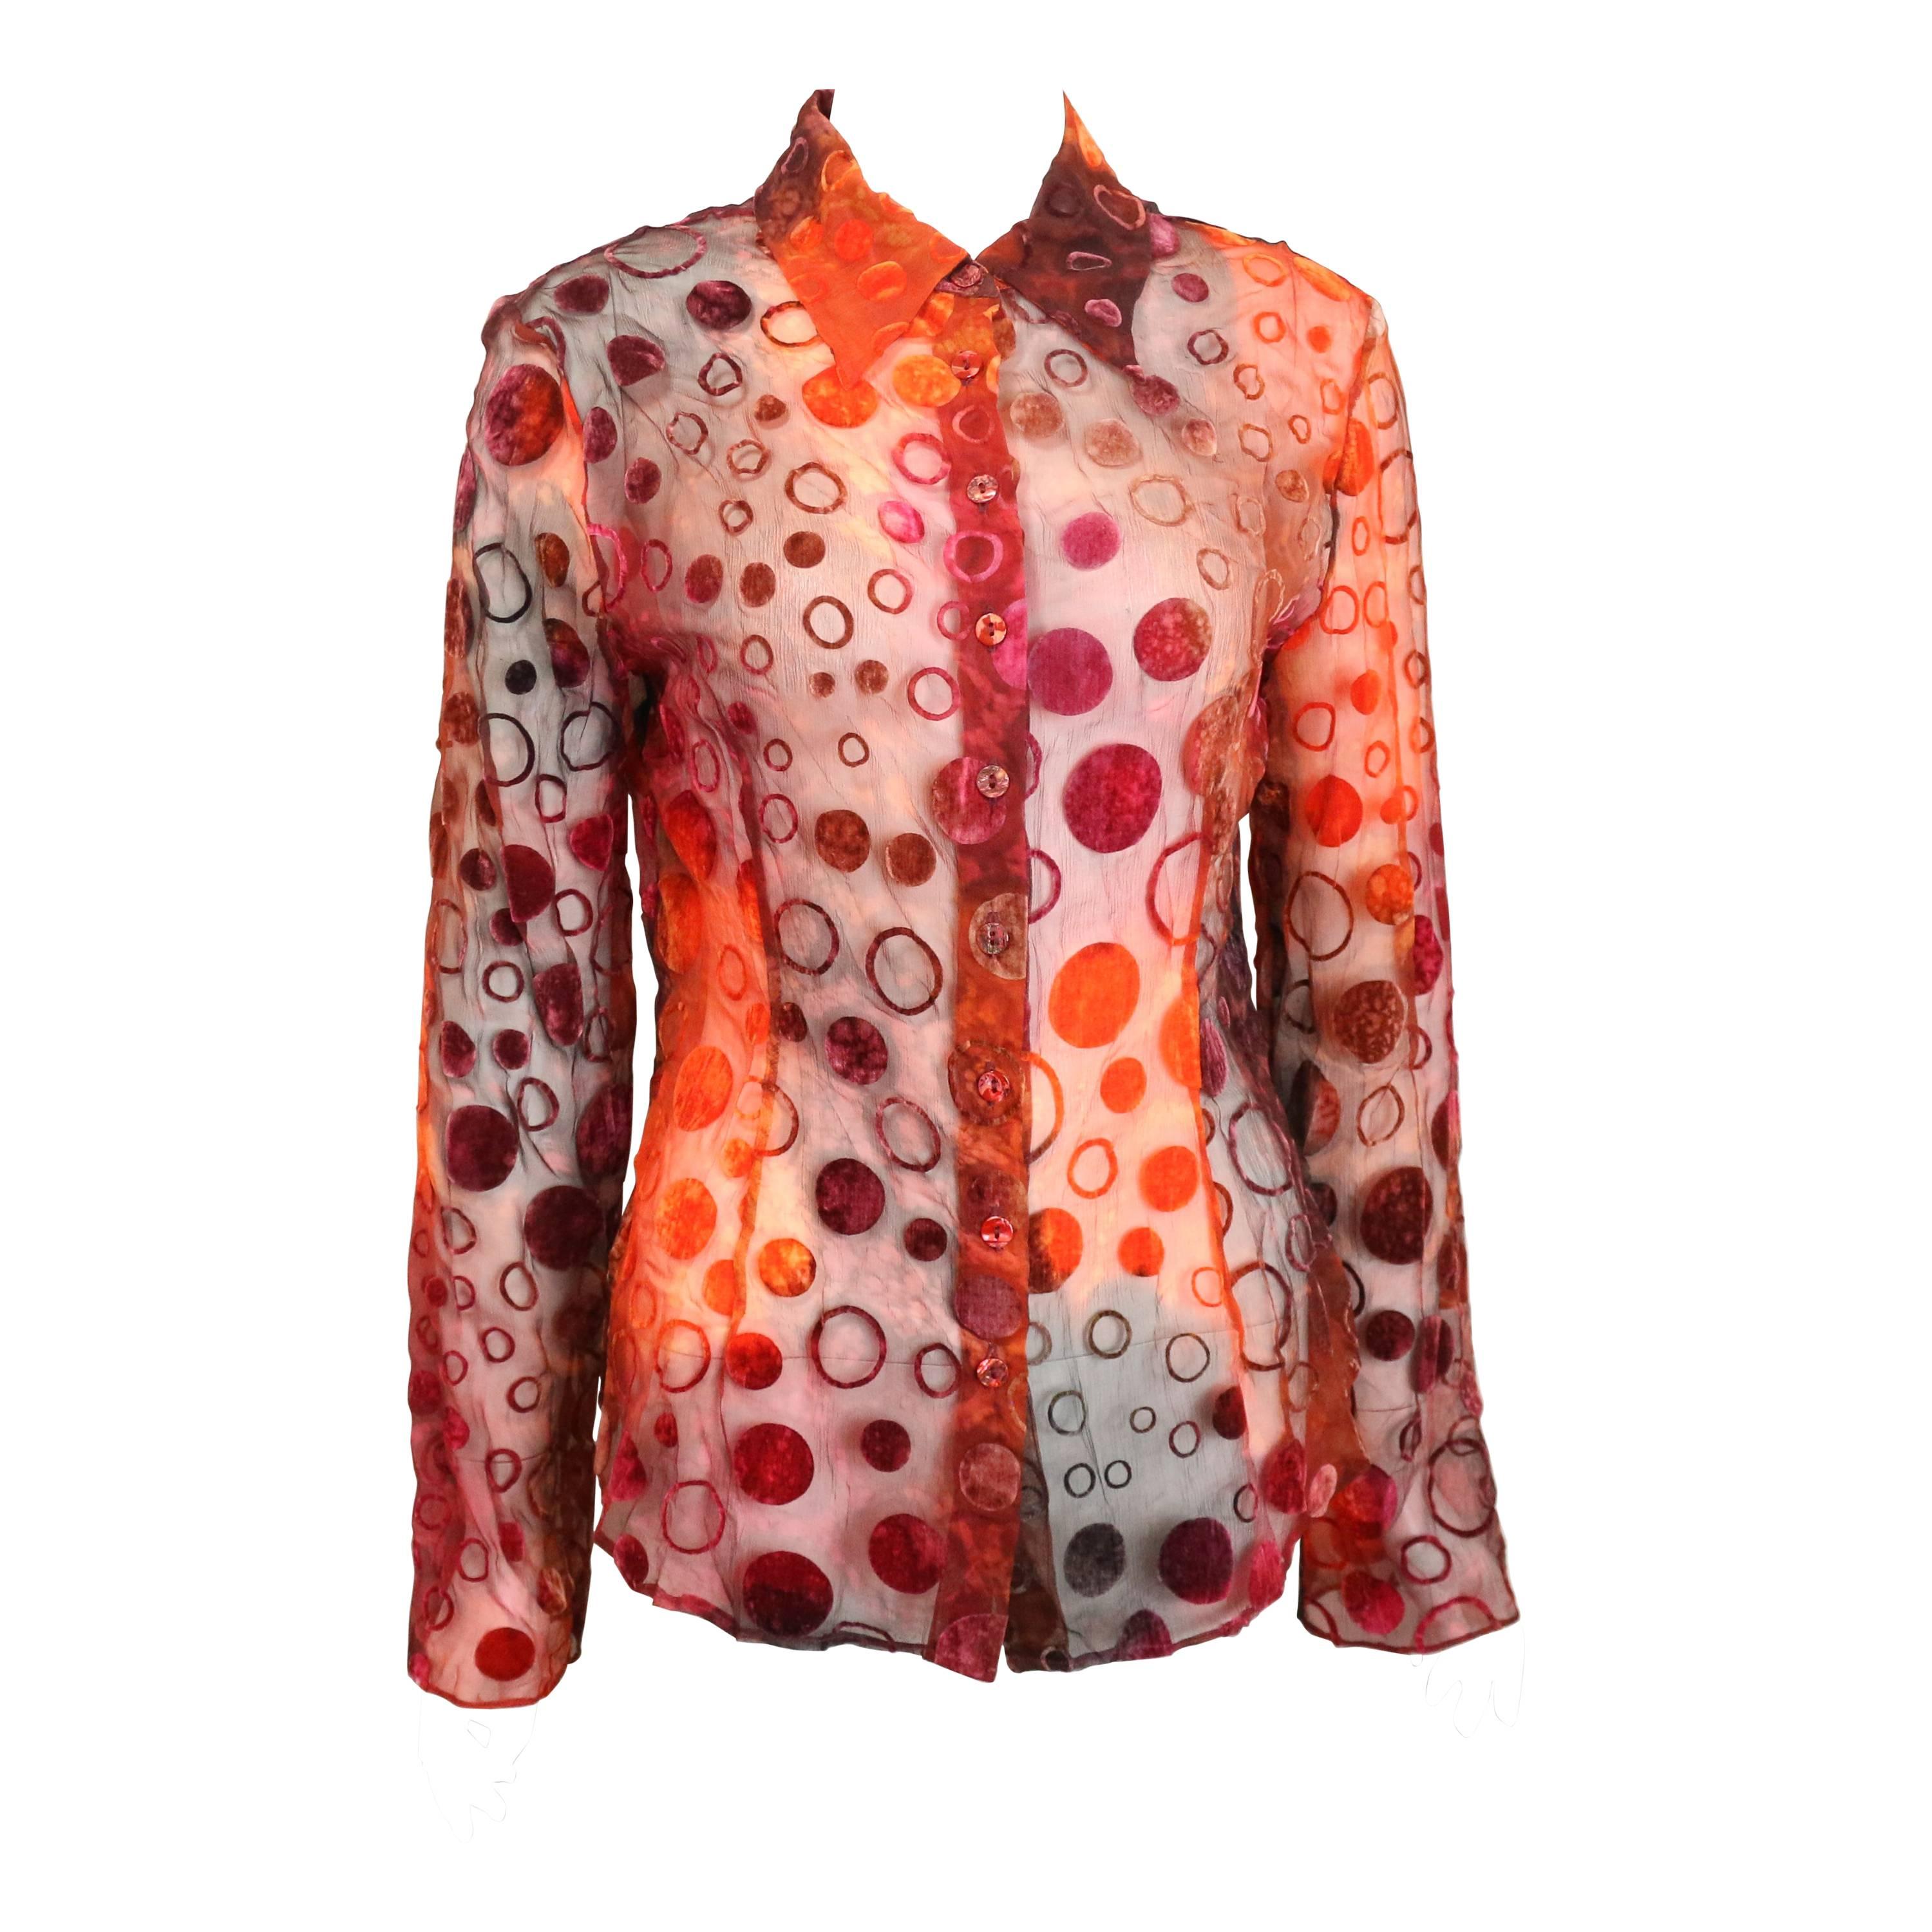 Plein Sud Orange and Red Polka Dot Long Sleeves Shirt  For Sale